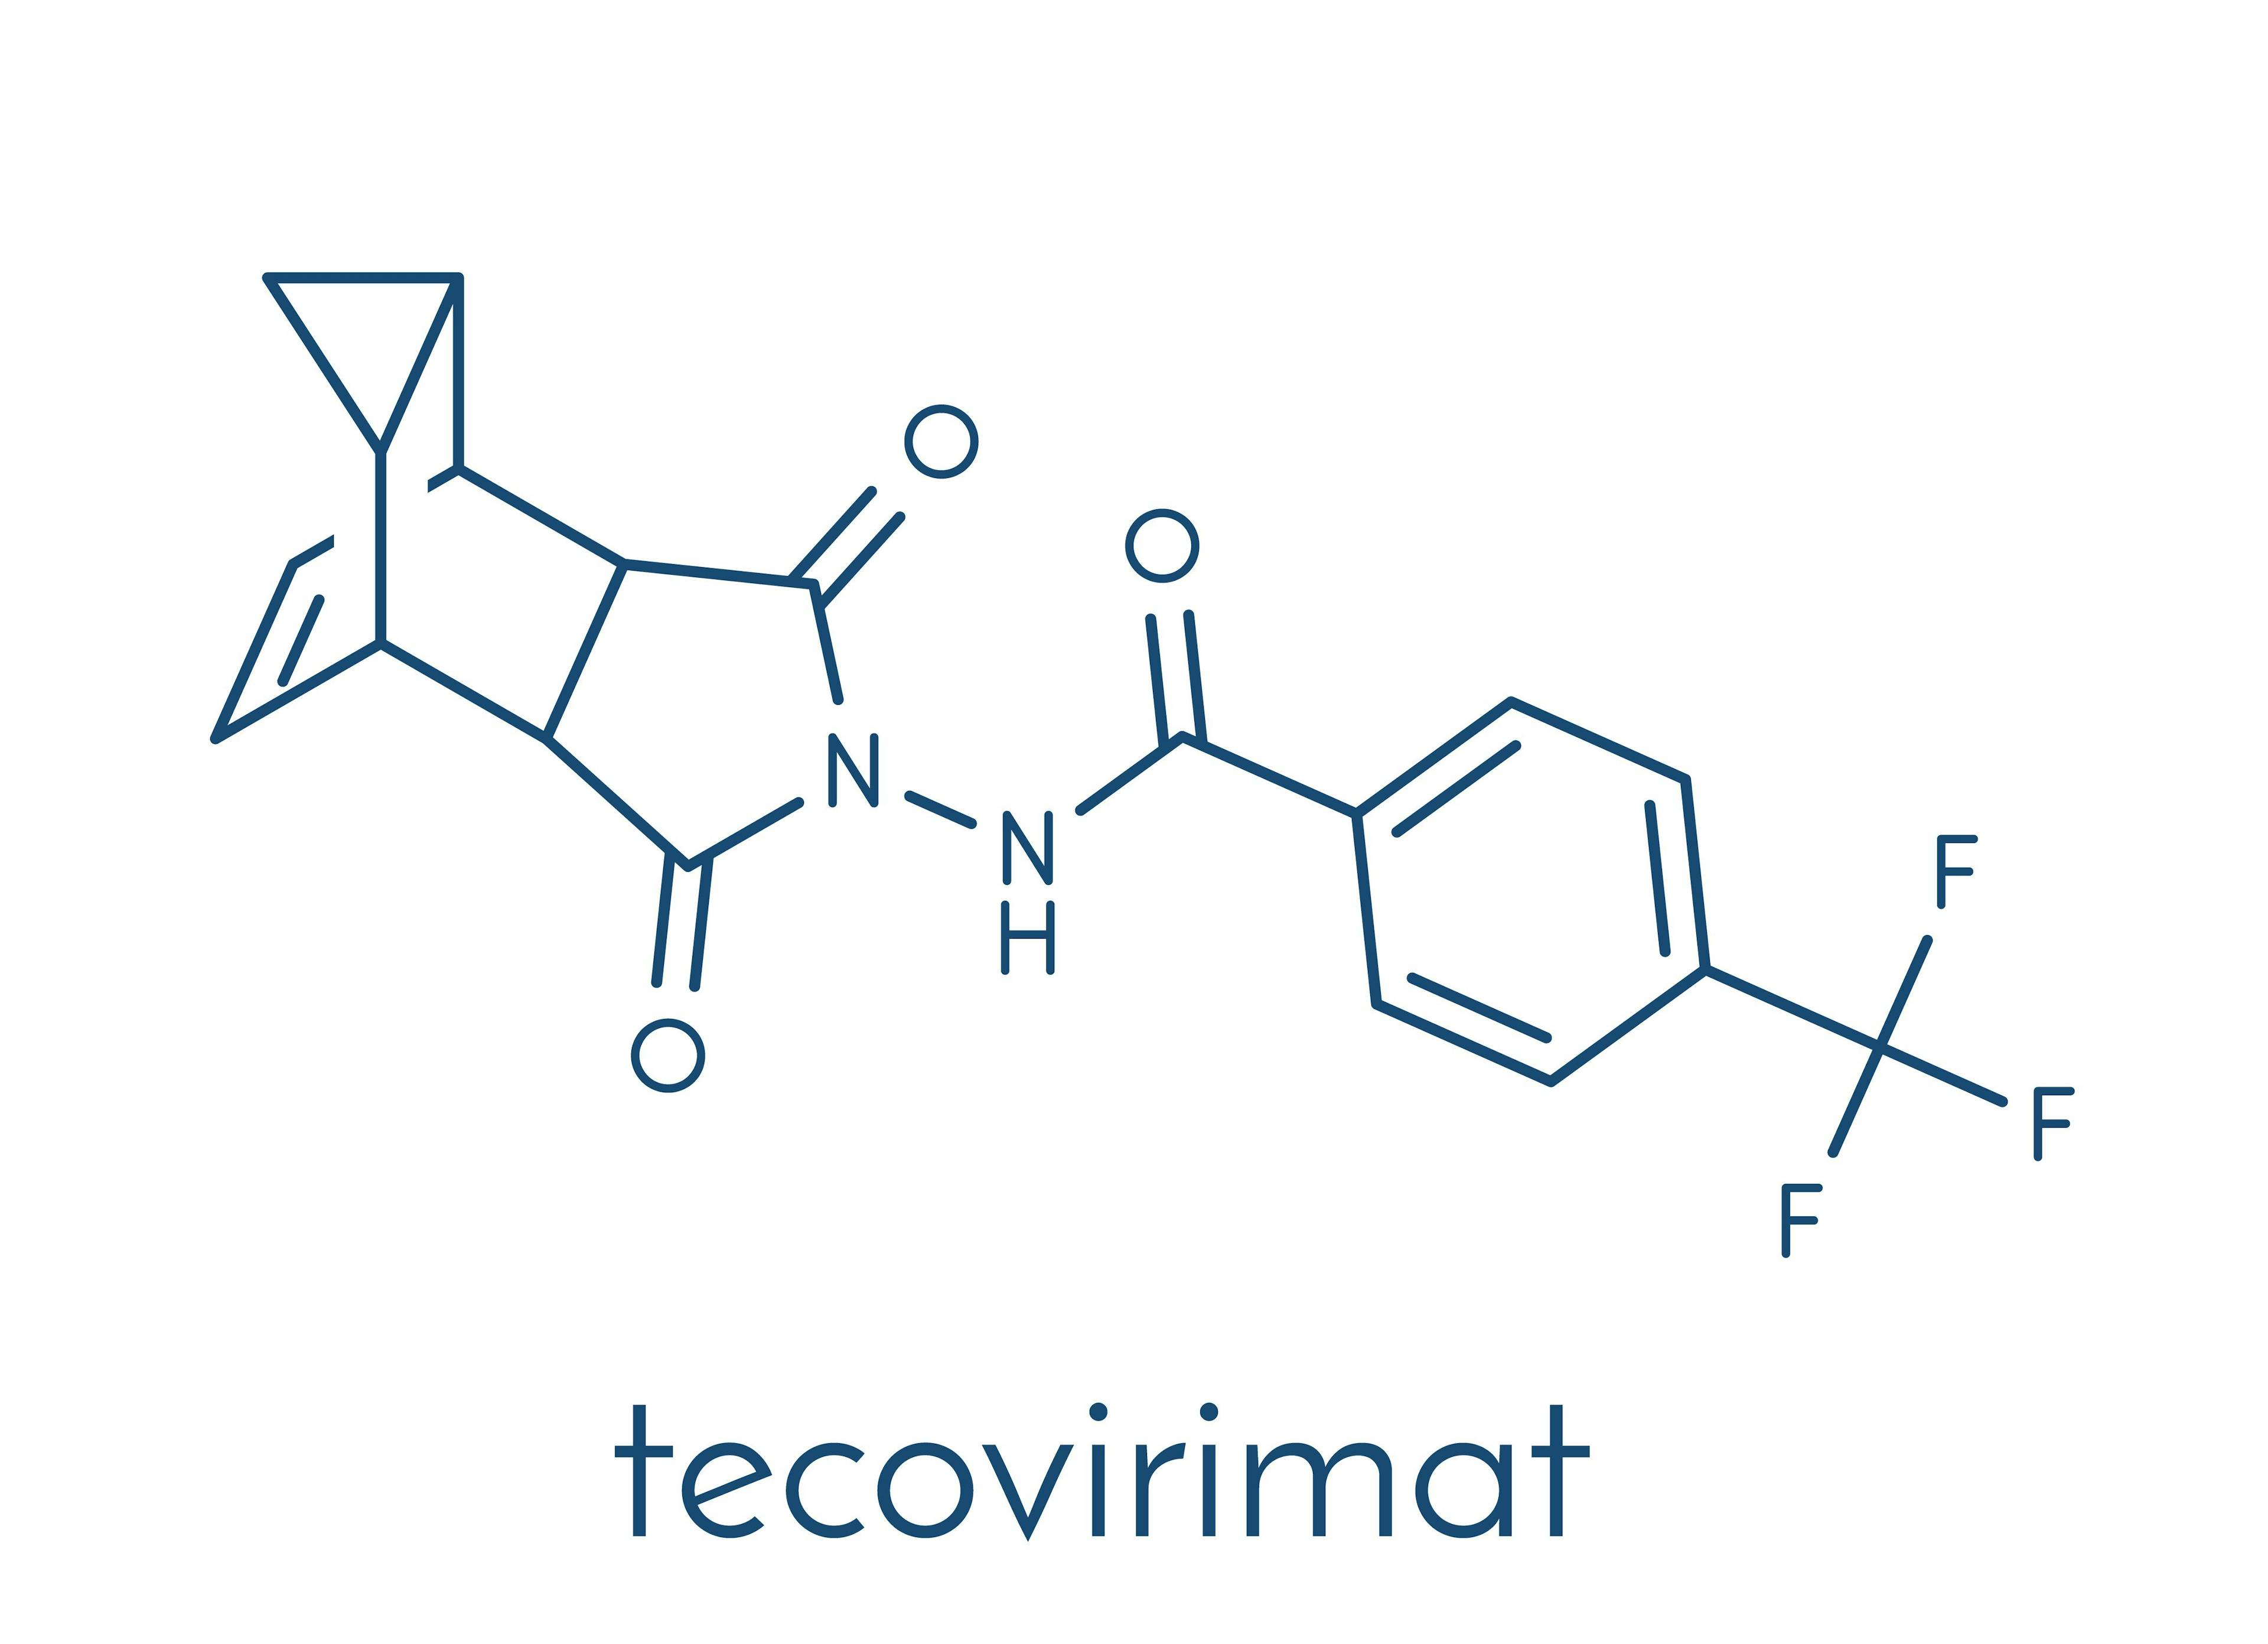 Among mpox patients treated with tecovirimat, there was no difference in treatment outcomes between those living with HIV and those without HIV.